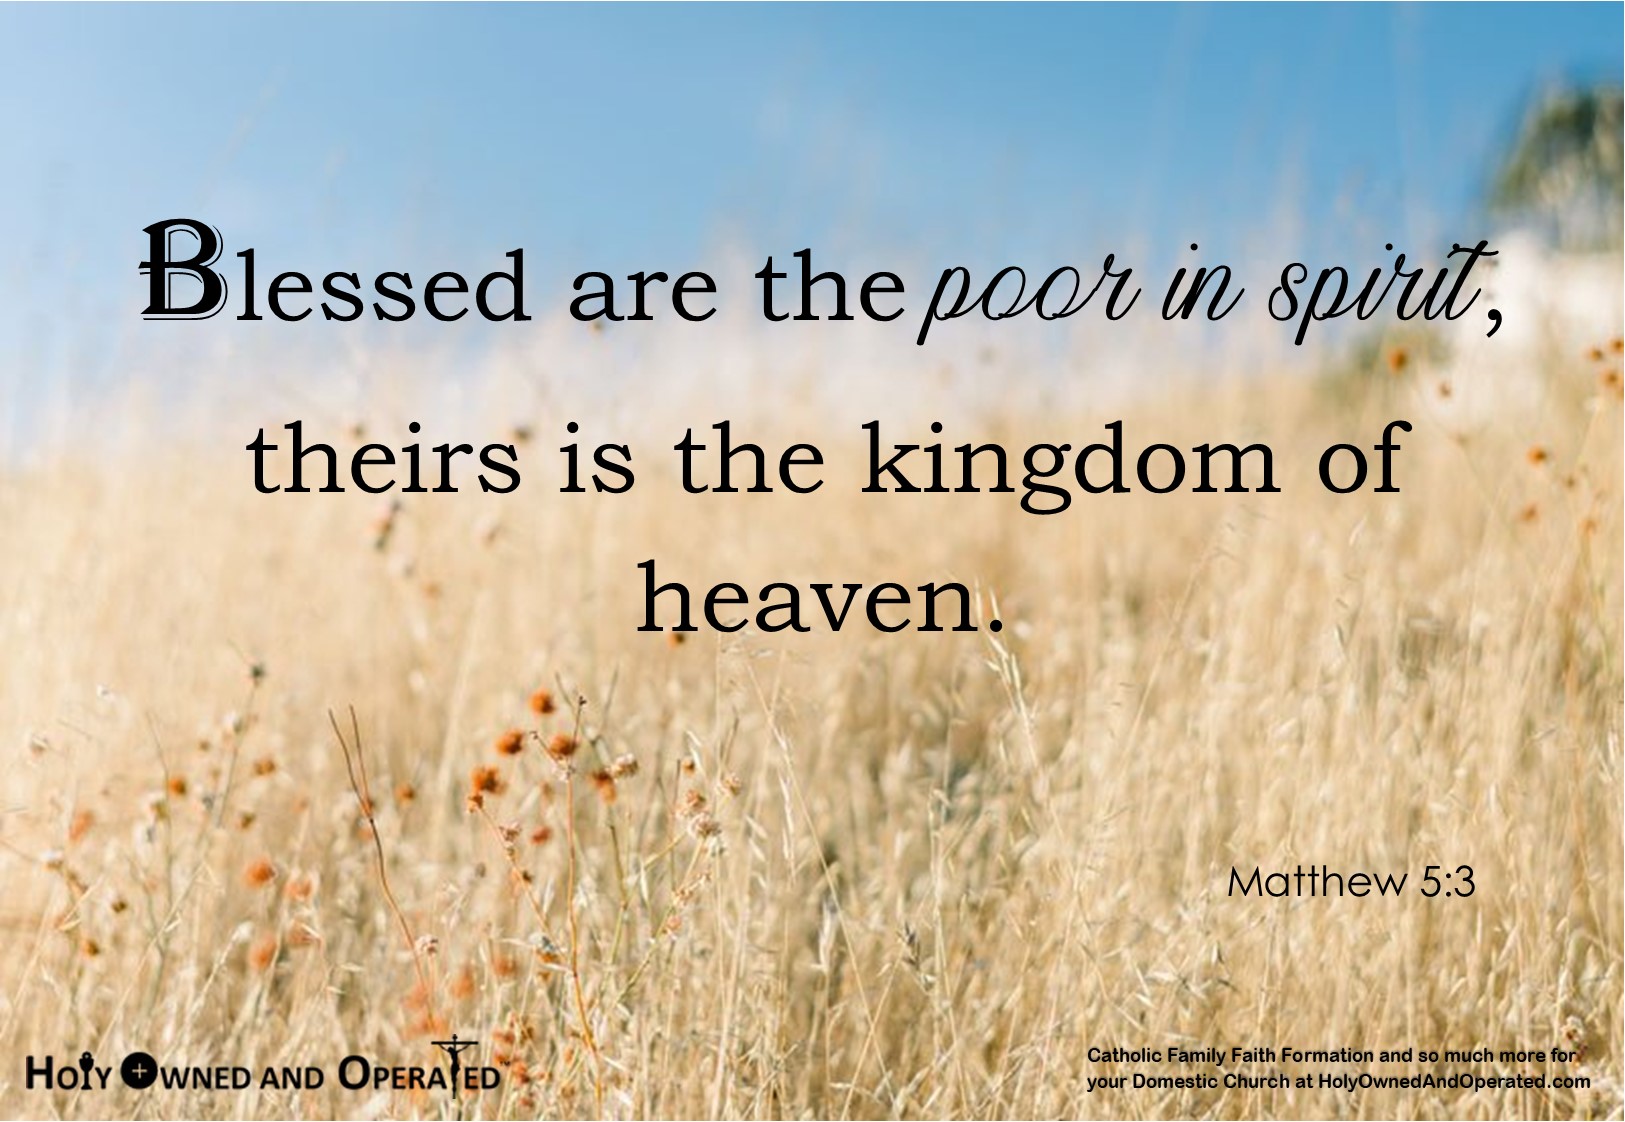 Wheat field image with text Blessed are the poor in spirit, theirs is the kingdom of heaven. Matthew 5:3 written across.